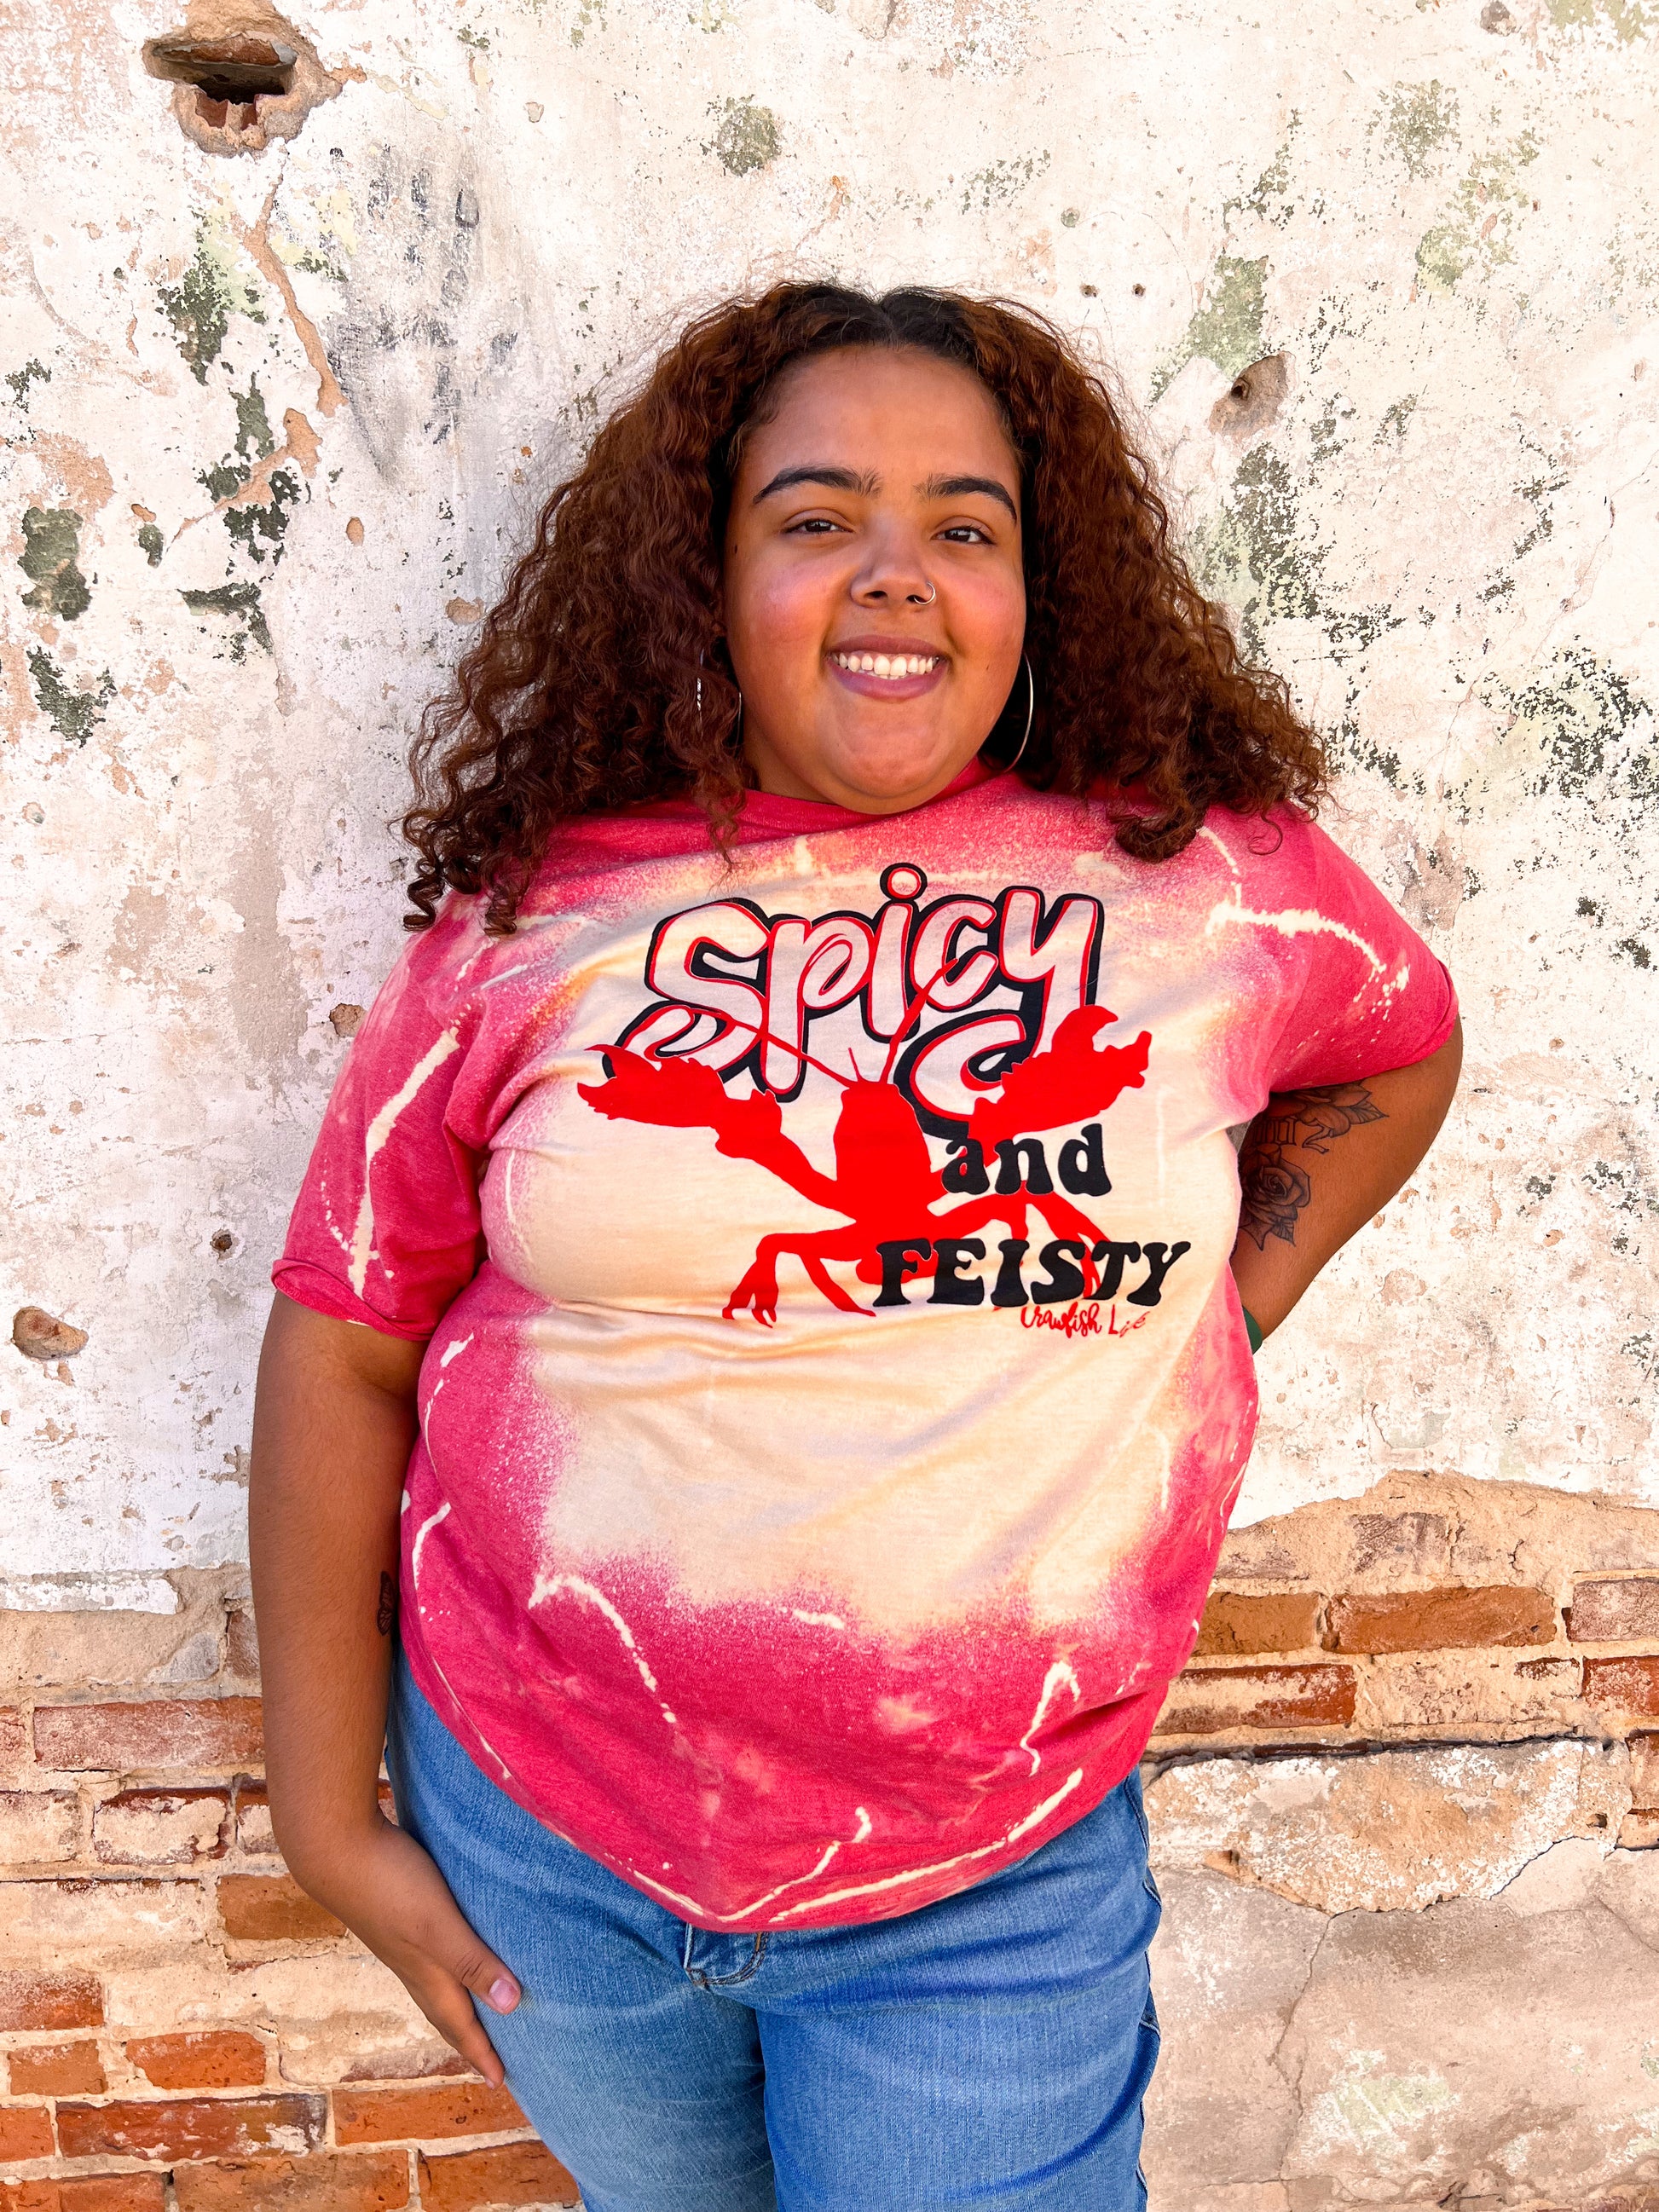 Spicy & Feisty Crawfish Life T Shirt - Plus-Shirts & Tops-Bling-A-Gogo-1st md, 8/09/23, Max Retail-The Twisted Chandelier